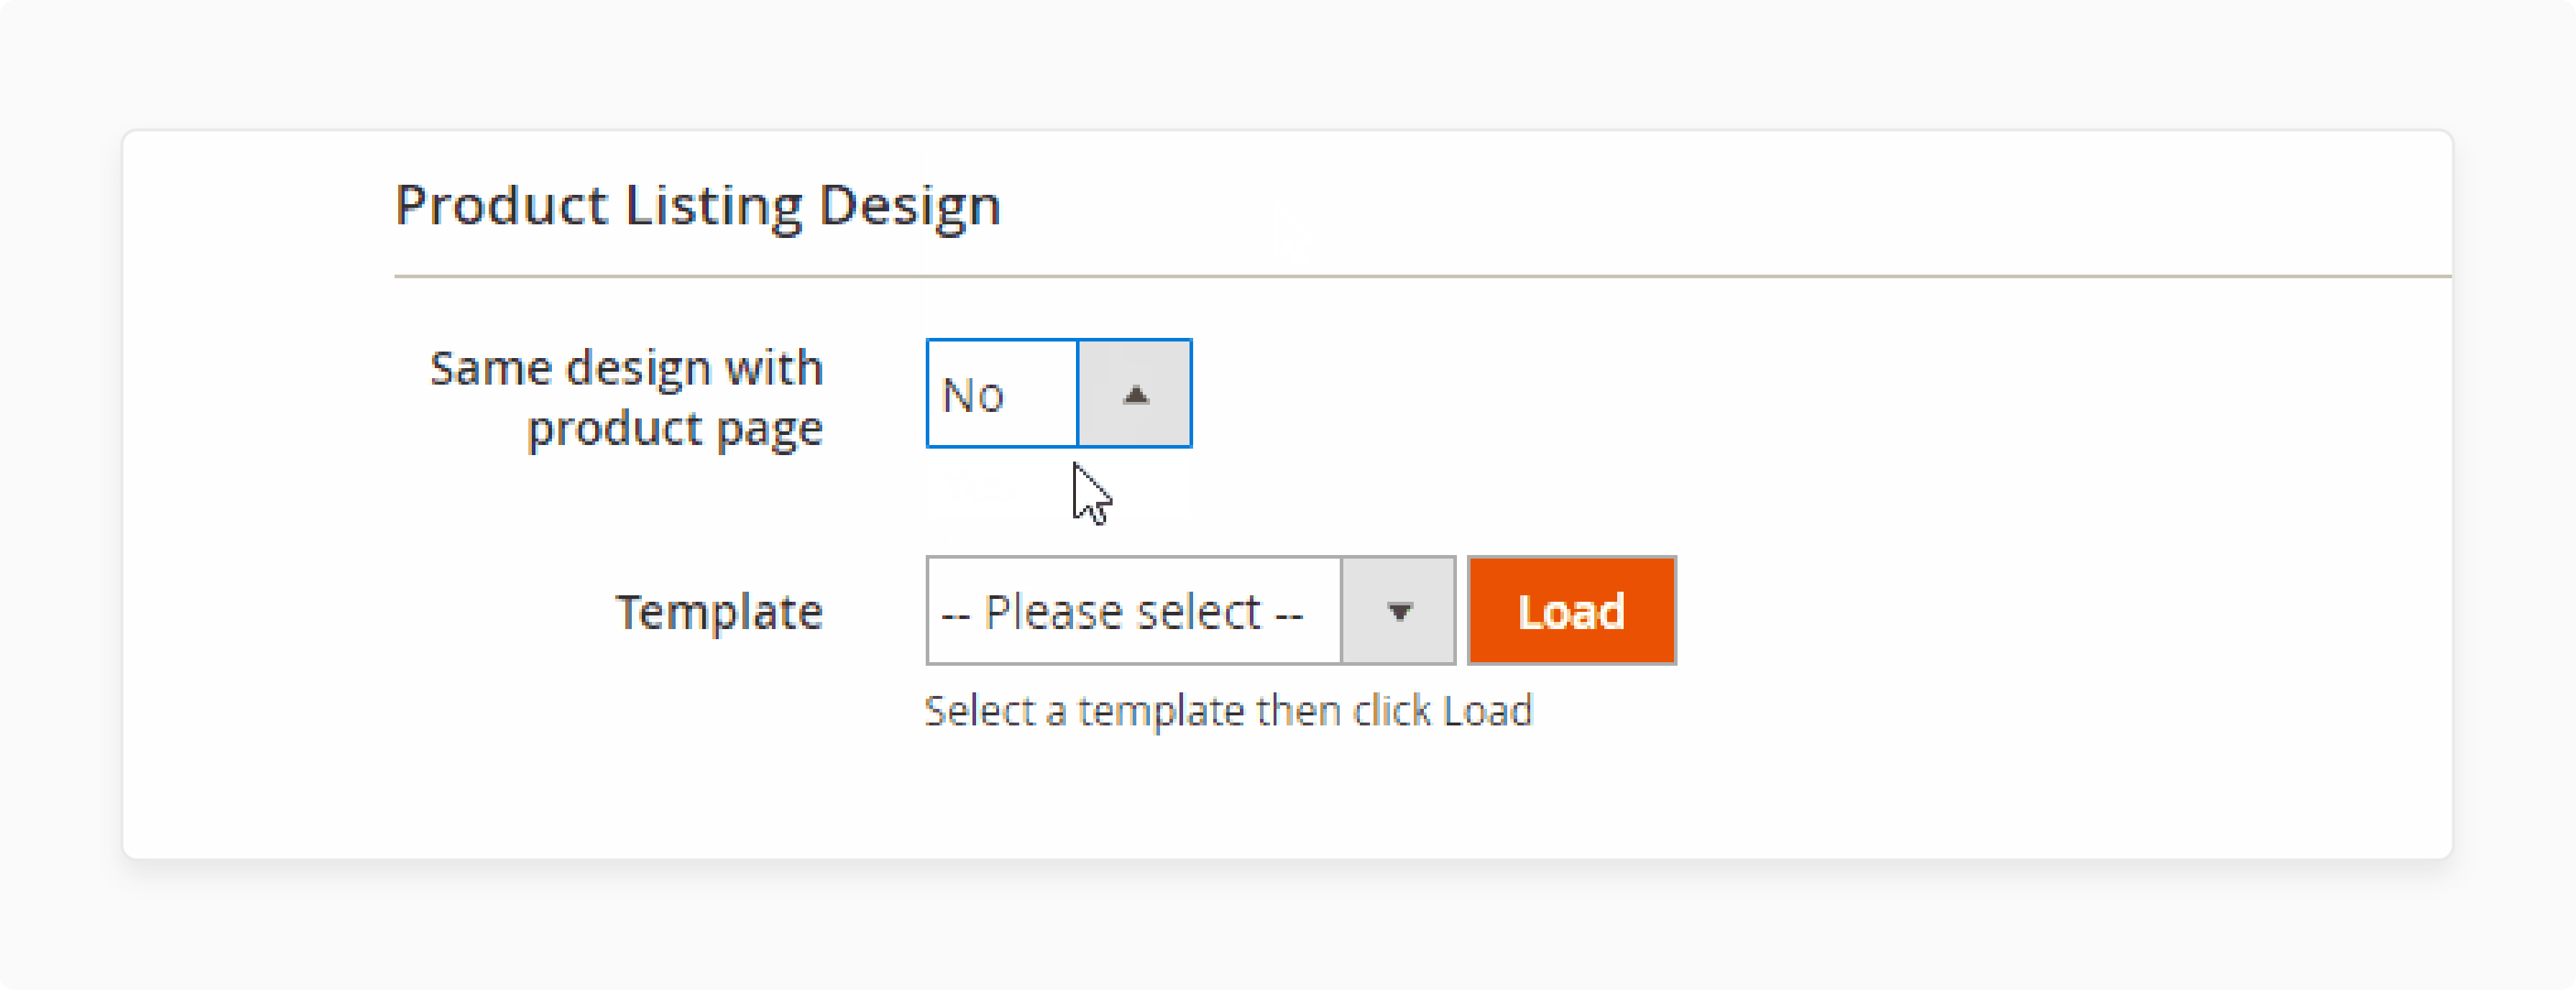 Porduct Listing Design in Magento 2 Product Labels